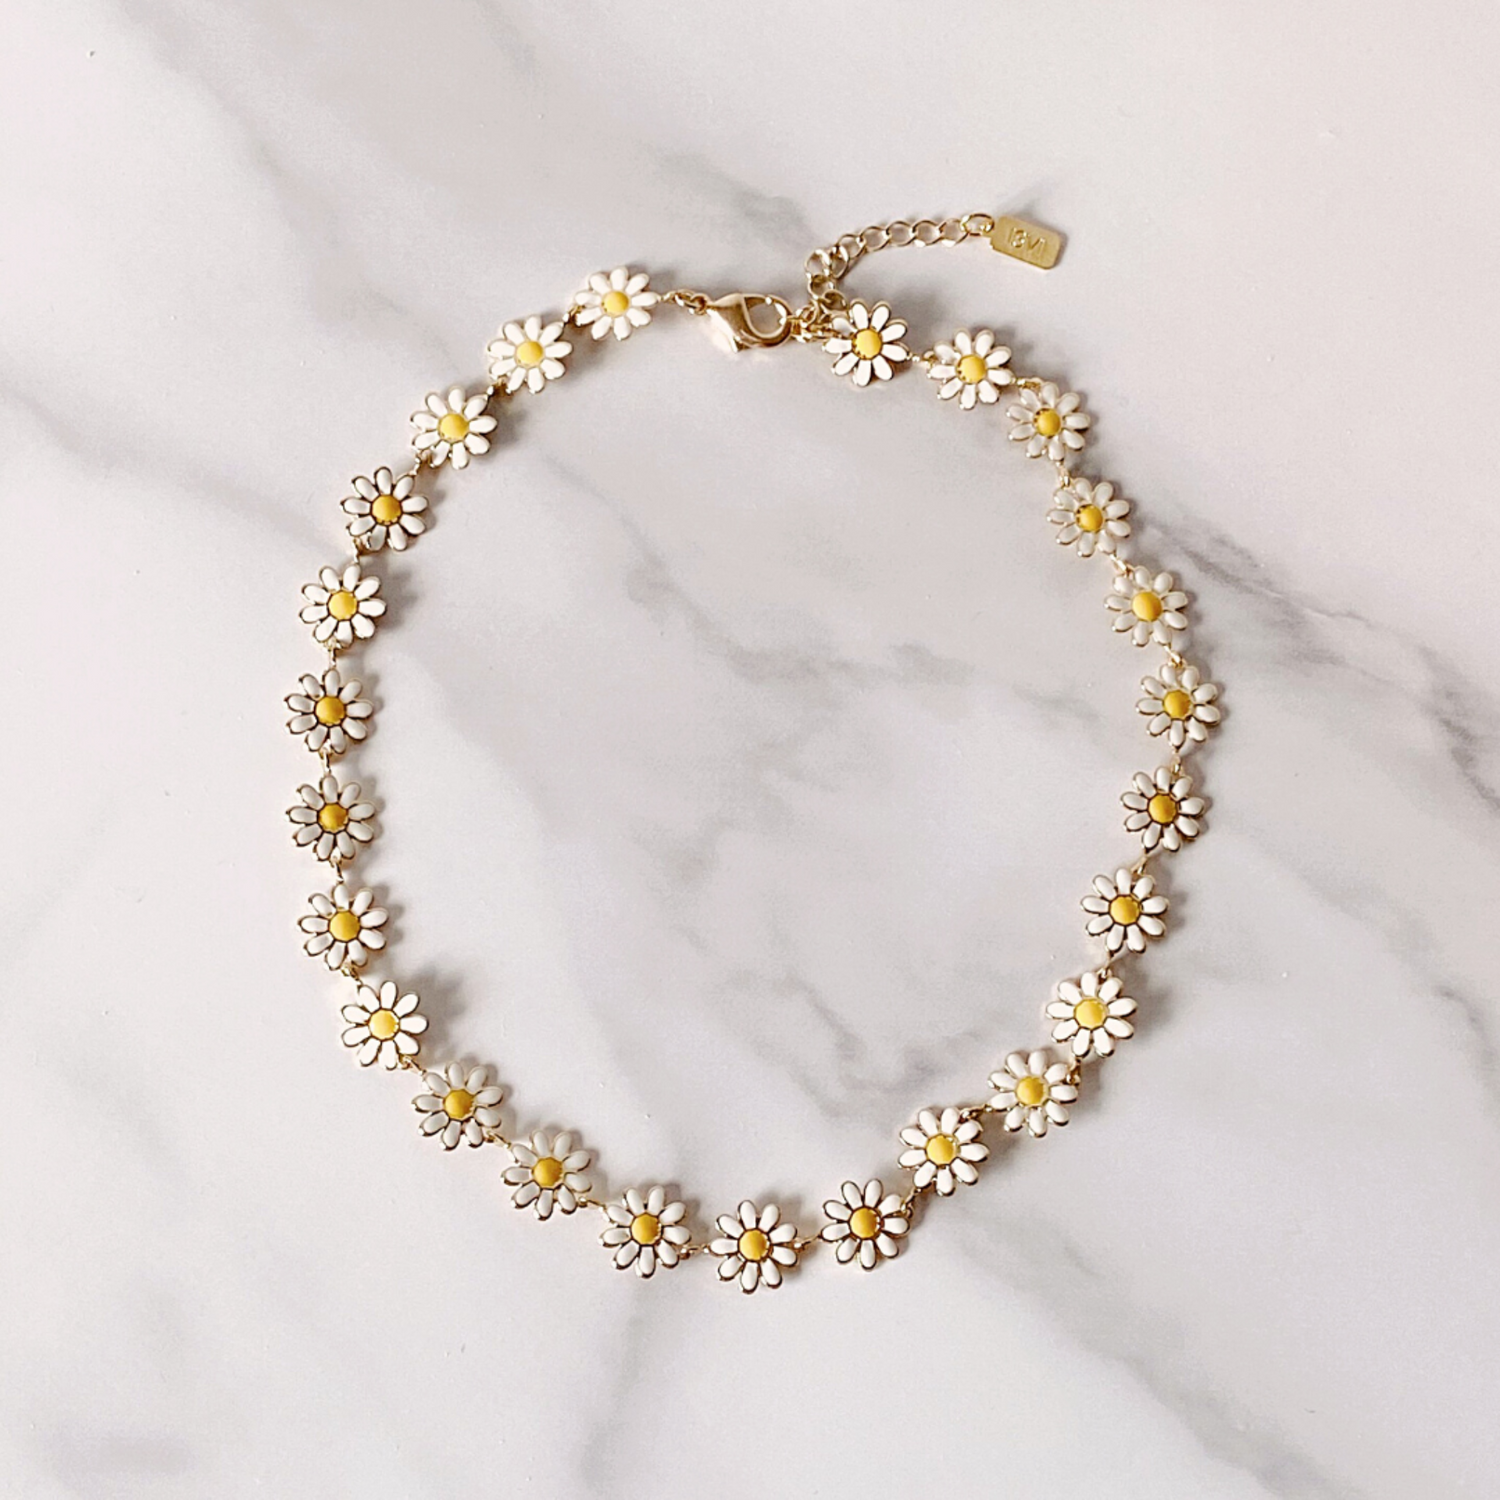 Miss Daisy Choker gold-plated 18k over brass, 12" with extender, by ISVI Boutique Miami